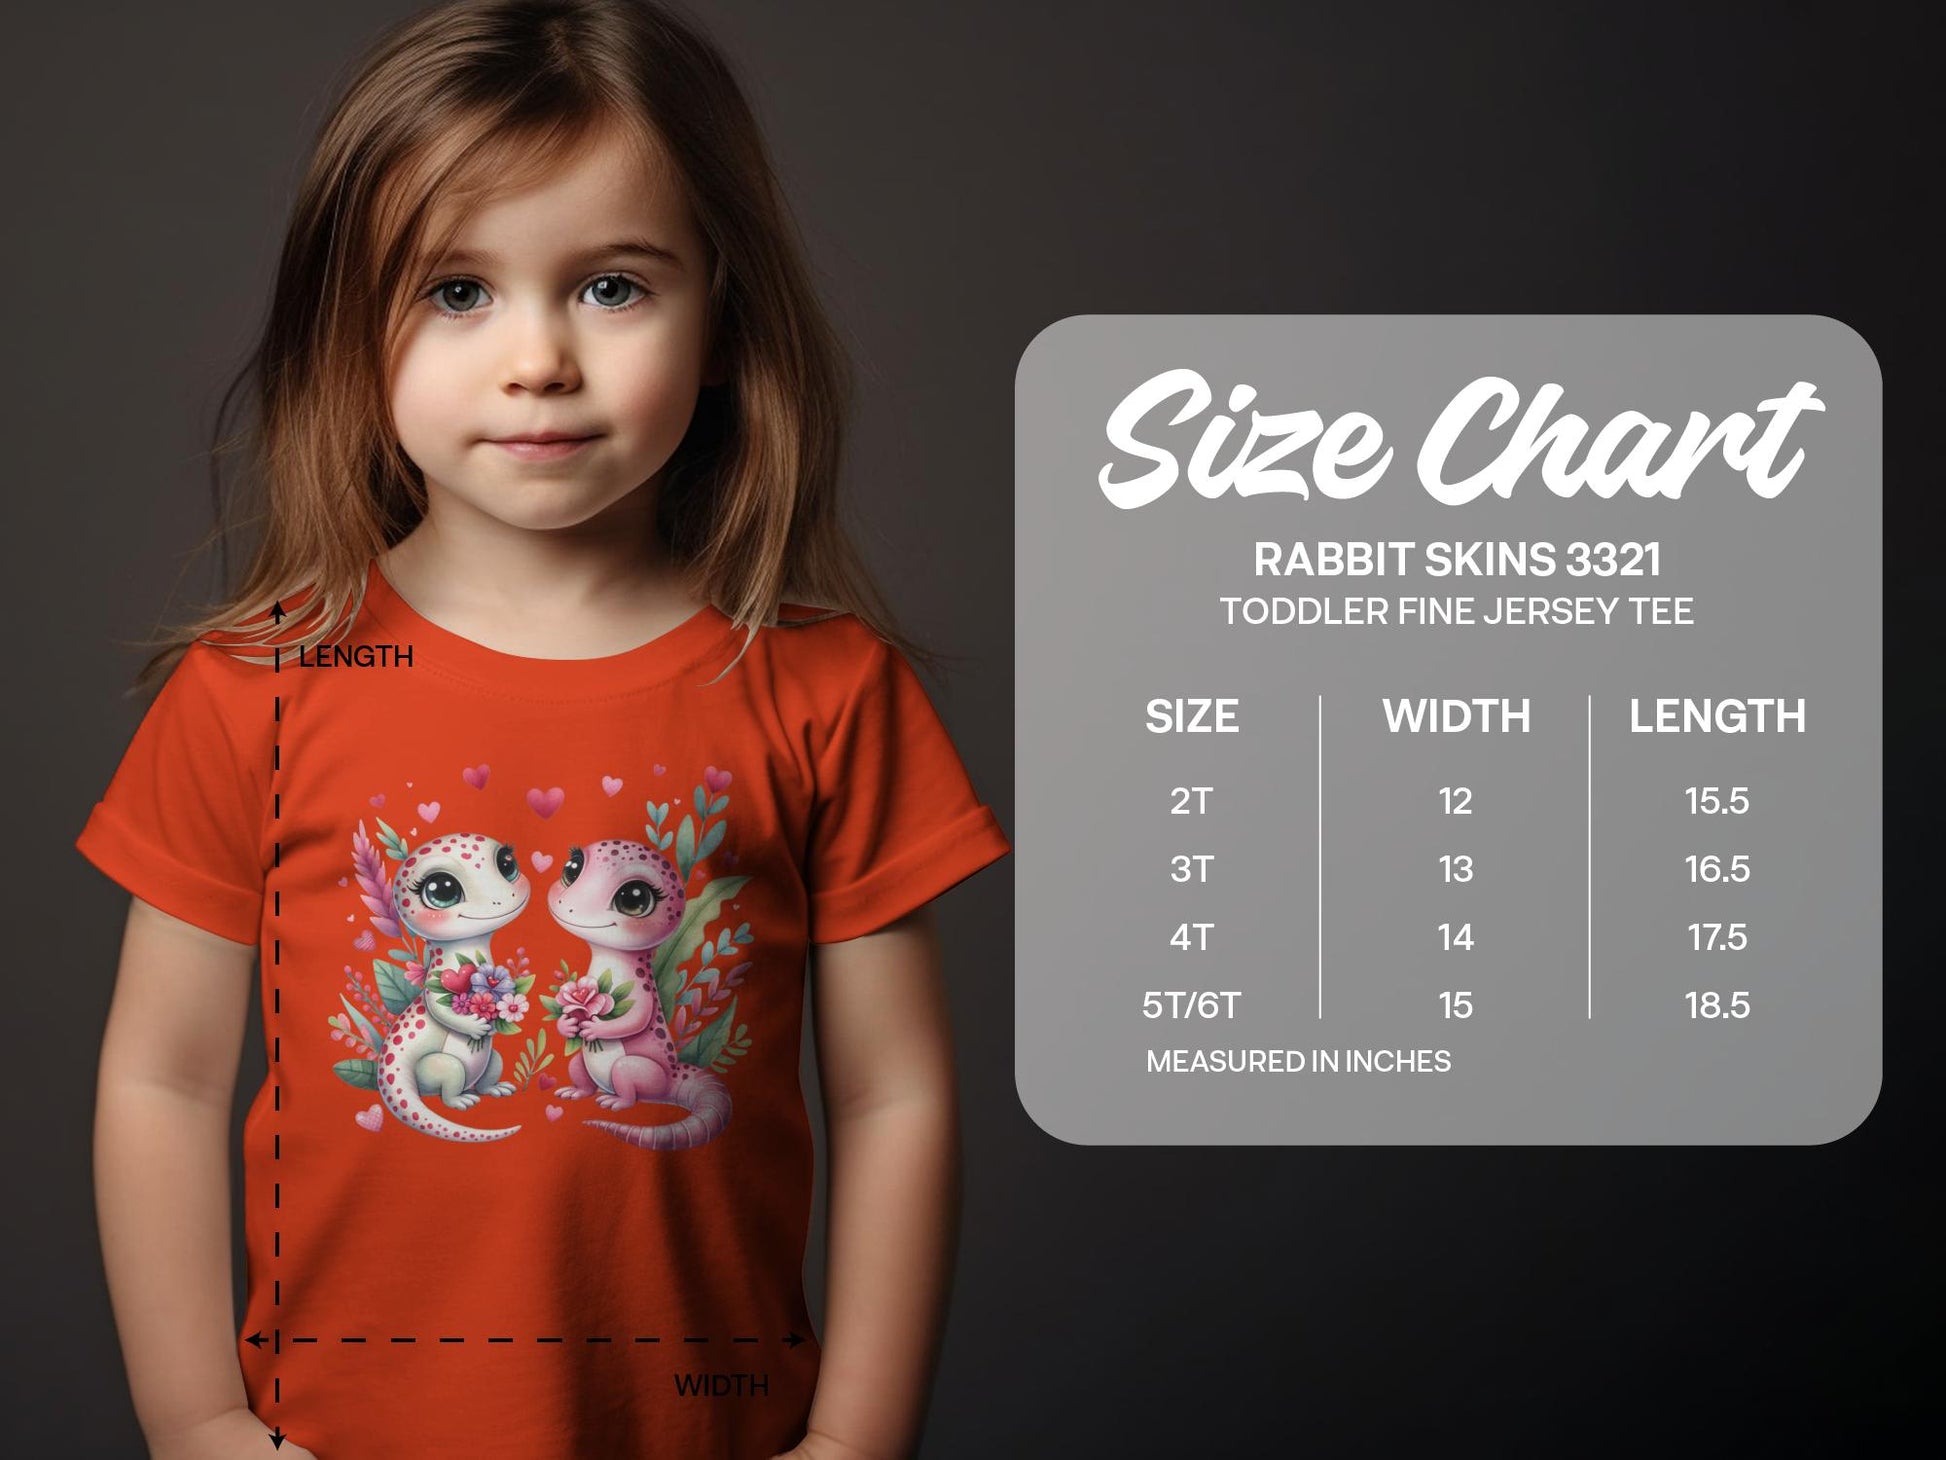 Adorable Lizard Cartoon T-shirt for Toddlers, Cute Geckos Graphic Tee with Rabbit Skins 3321 size chart